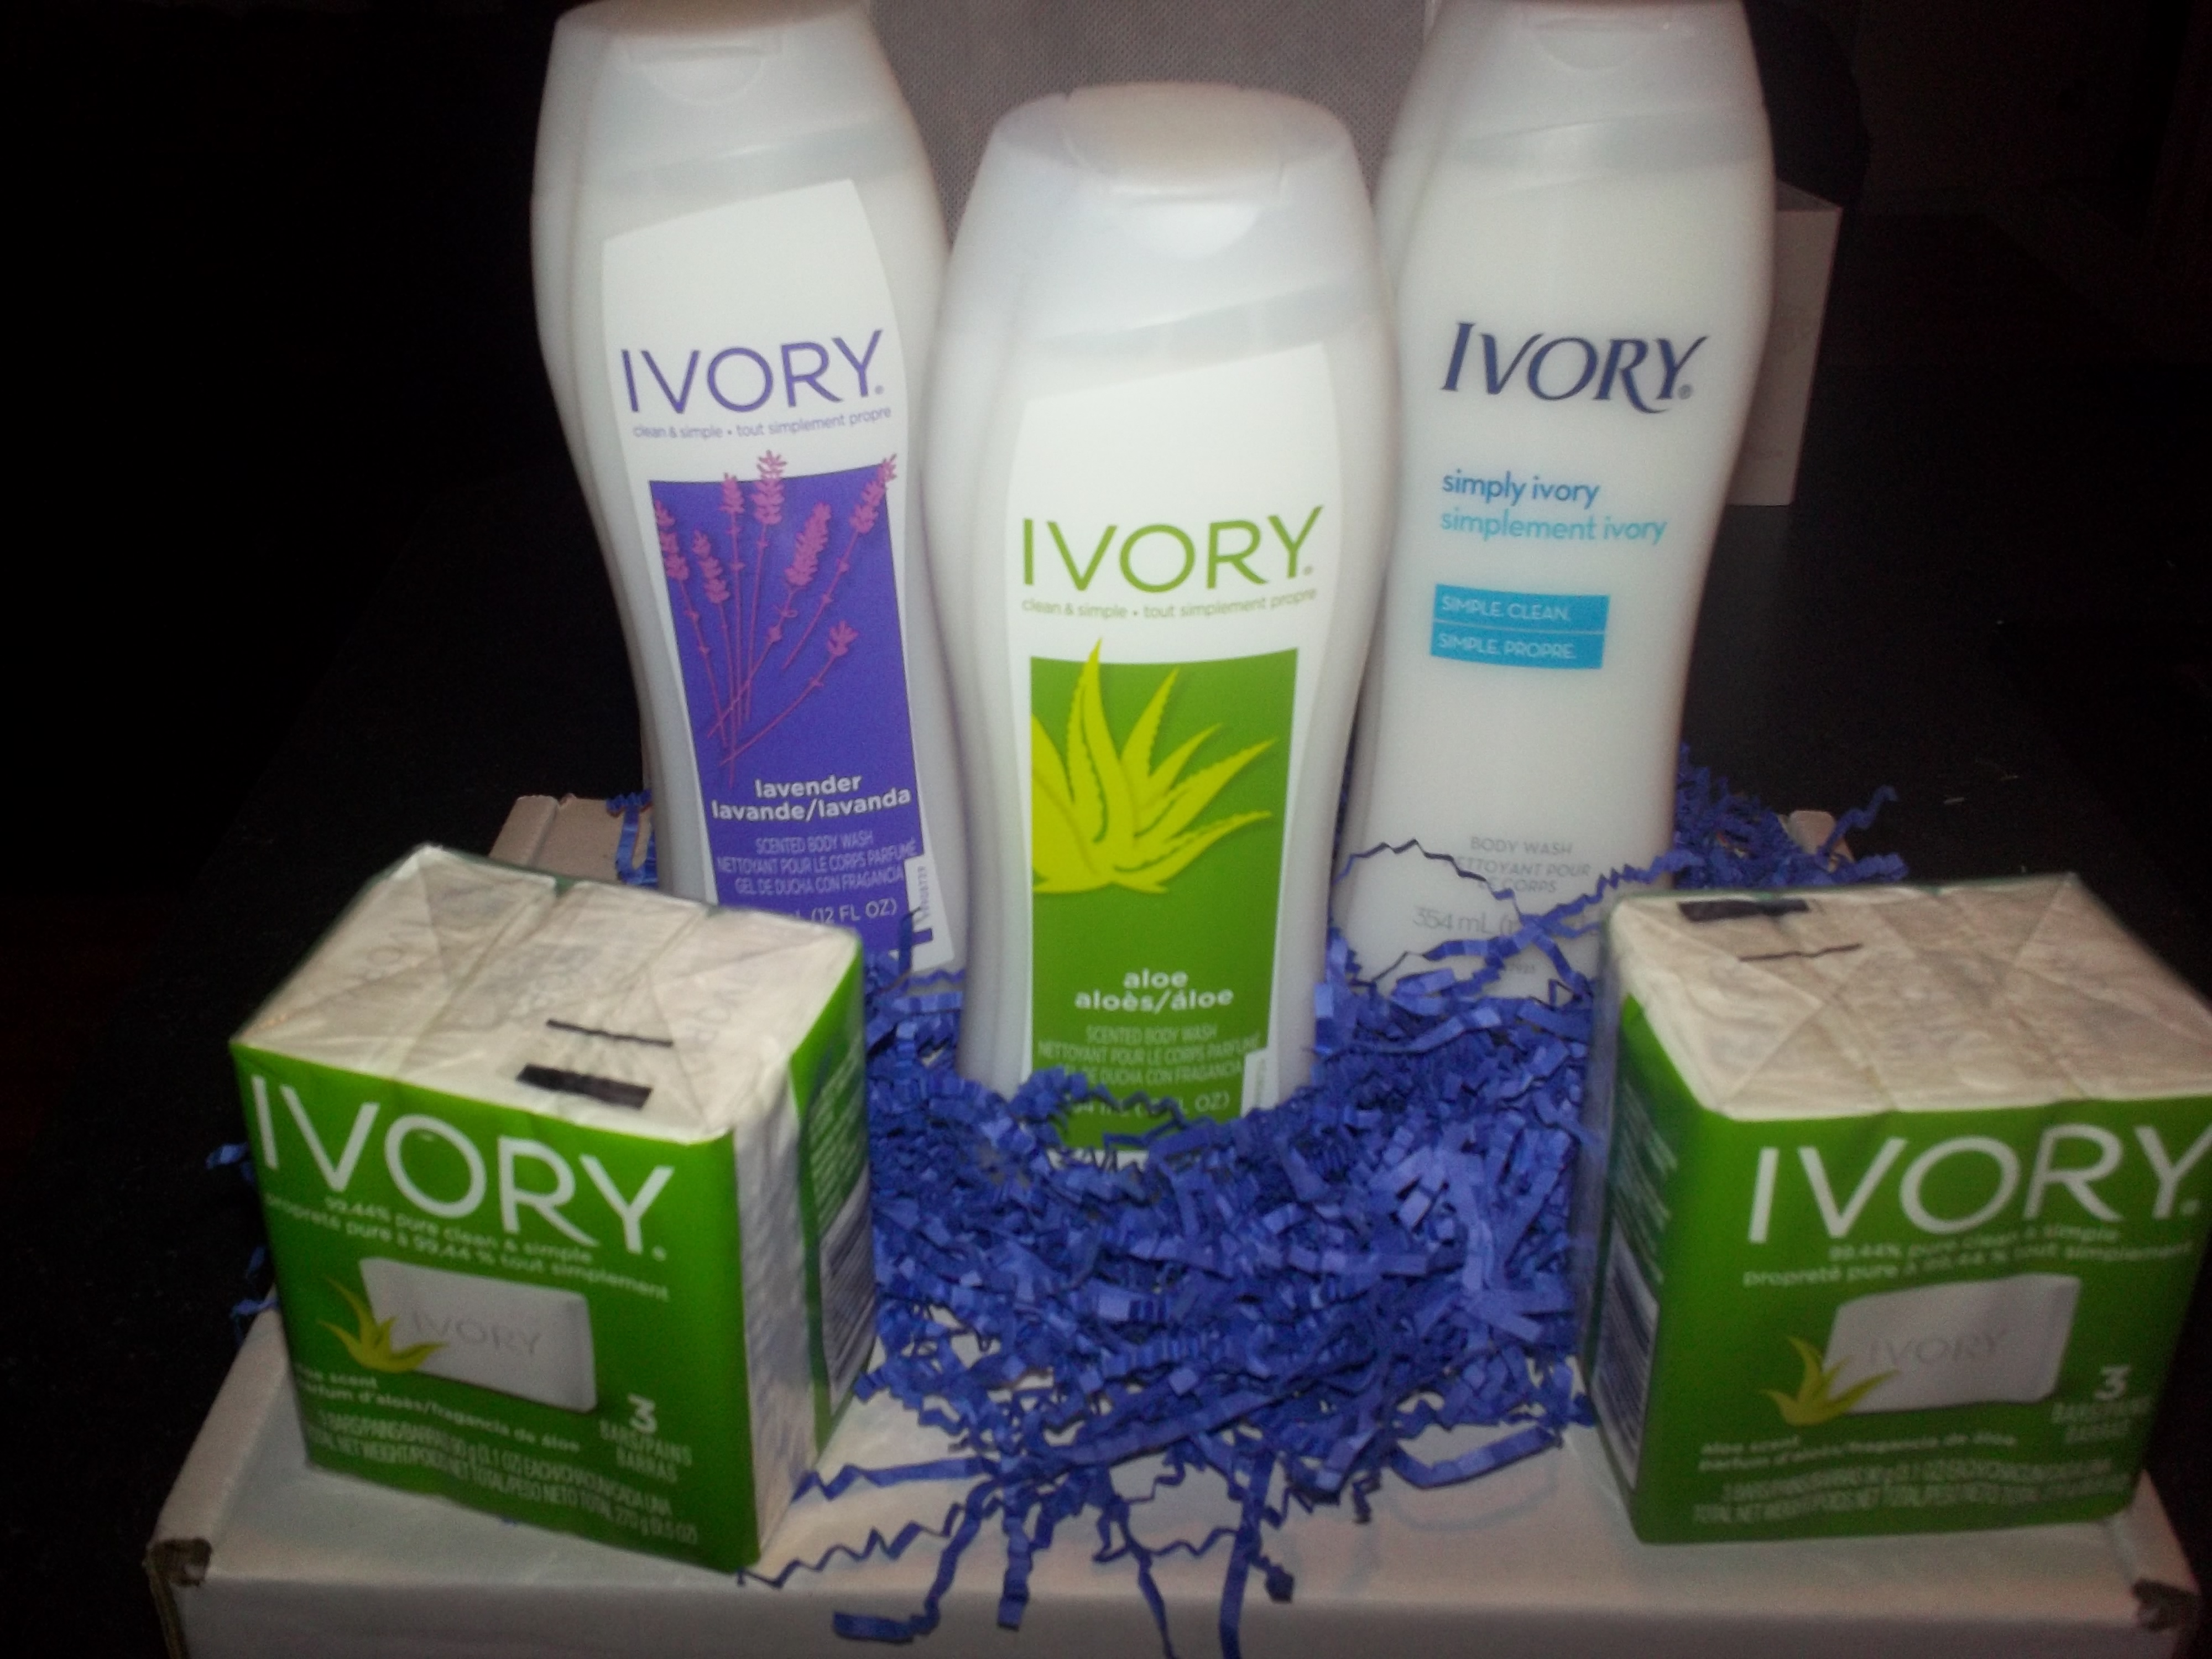 Ivory soap #Giveaway (01/16) | Emily Reviews